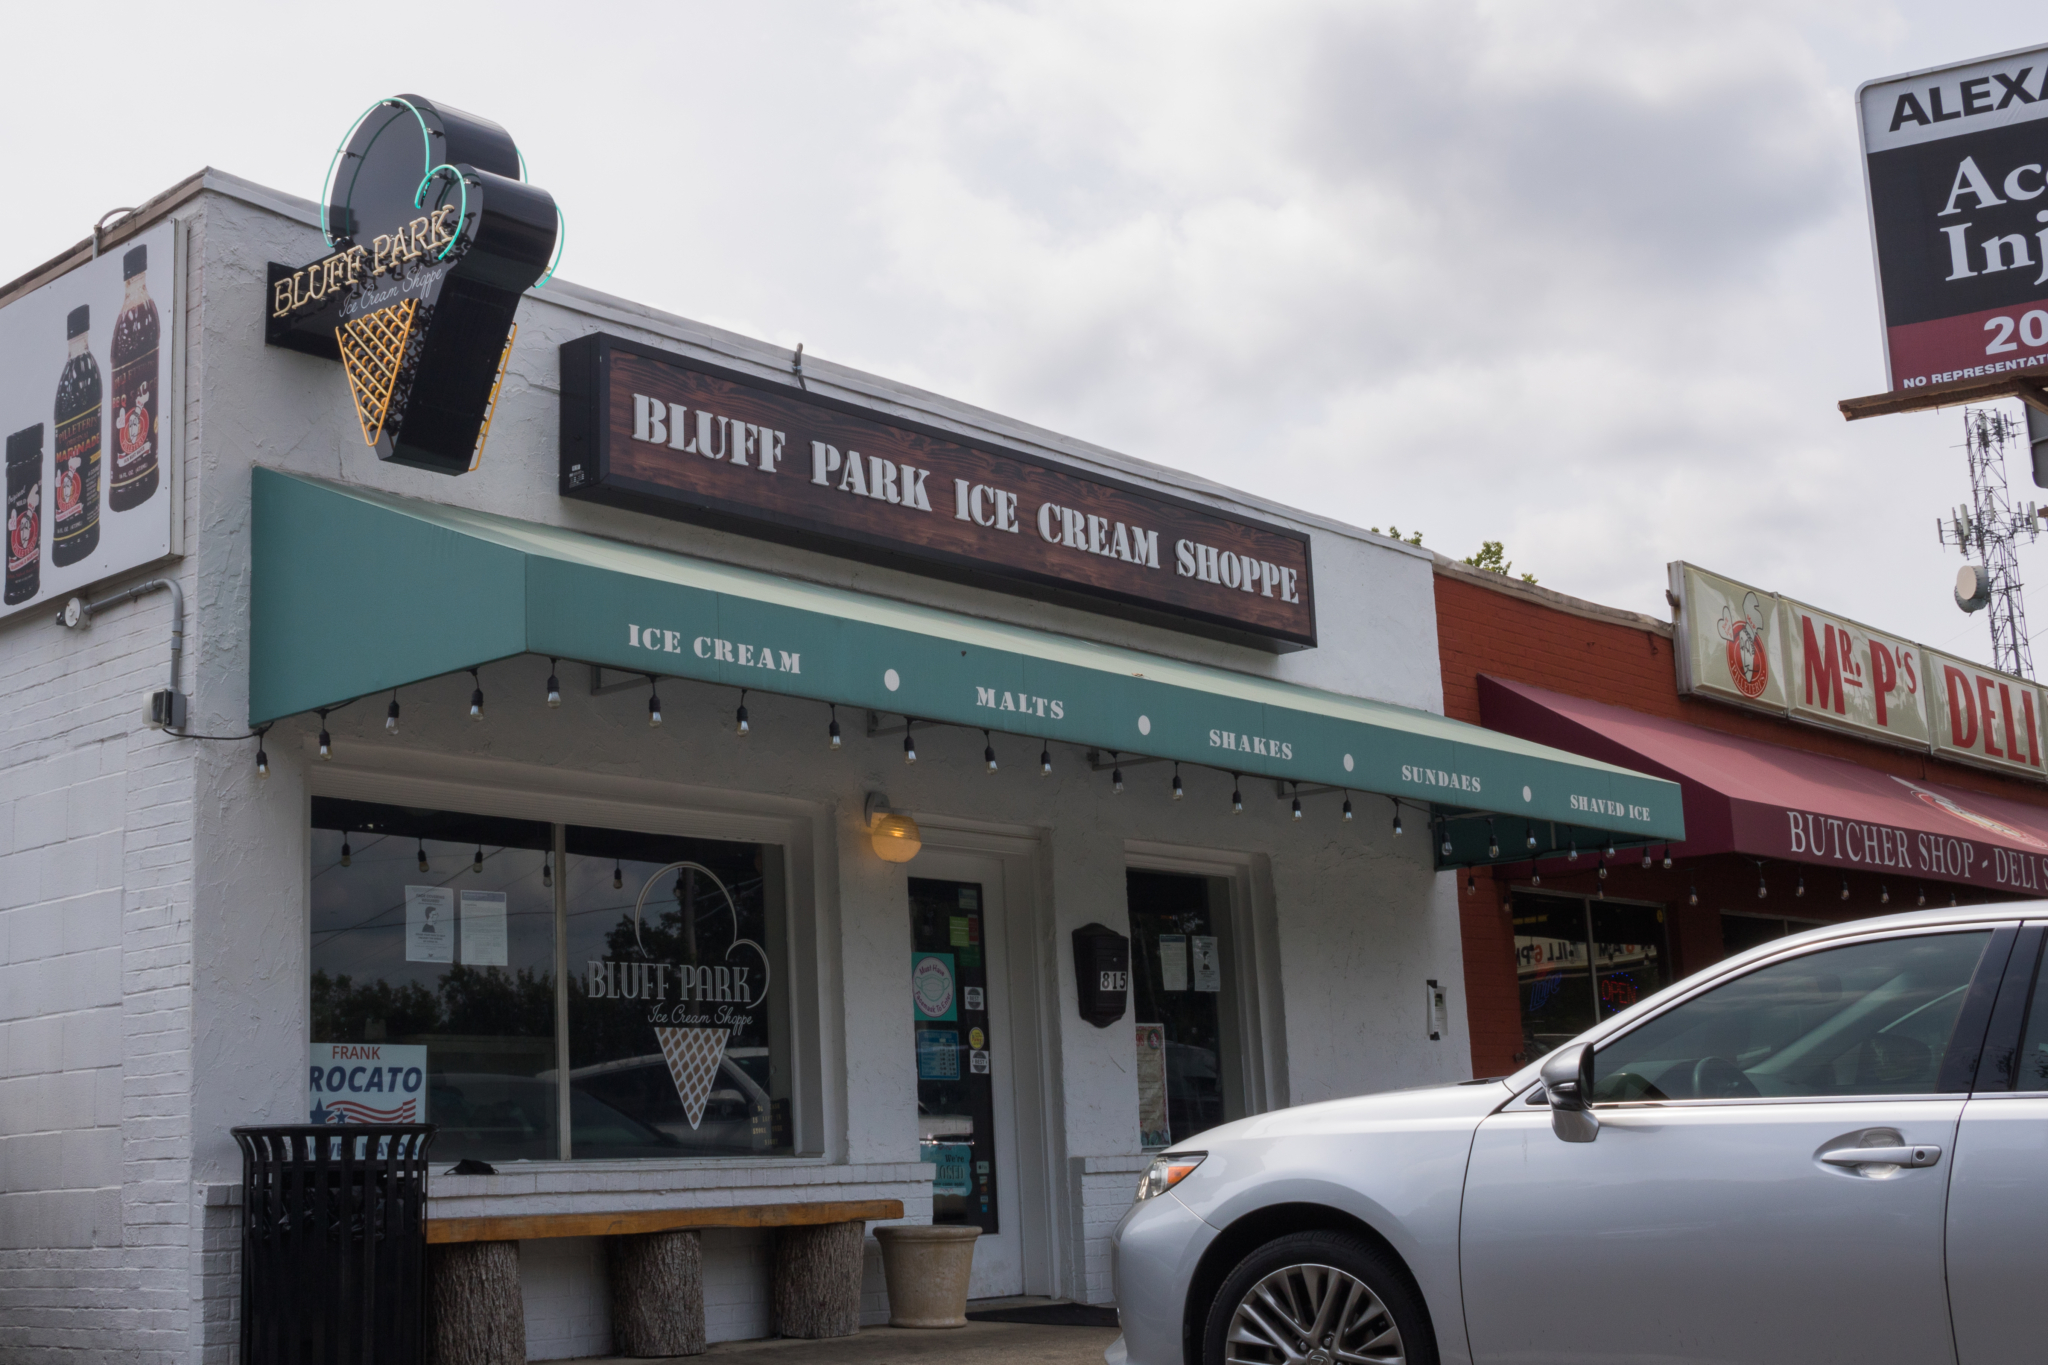 Bluff Park Ice Cream 2 7 things you need to know about Bluff Park‚ including its revitalization project